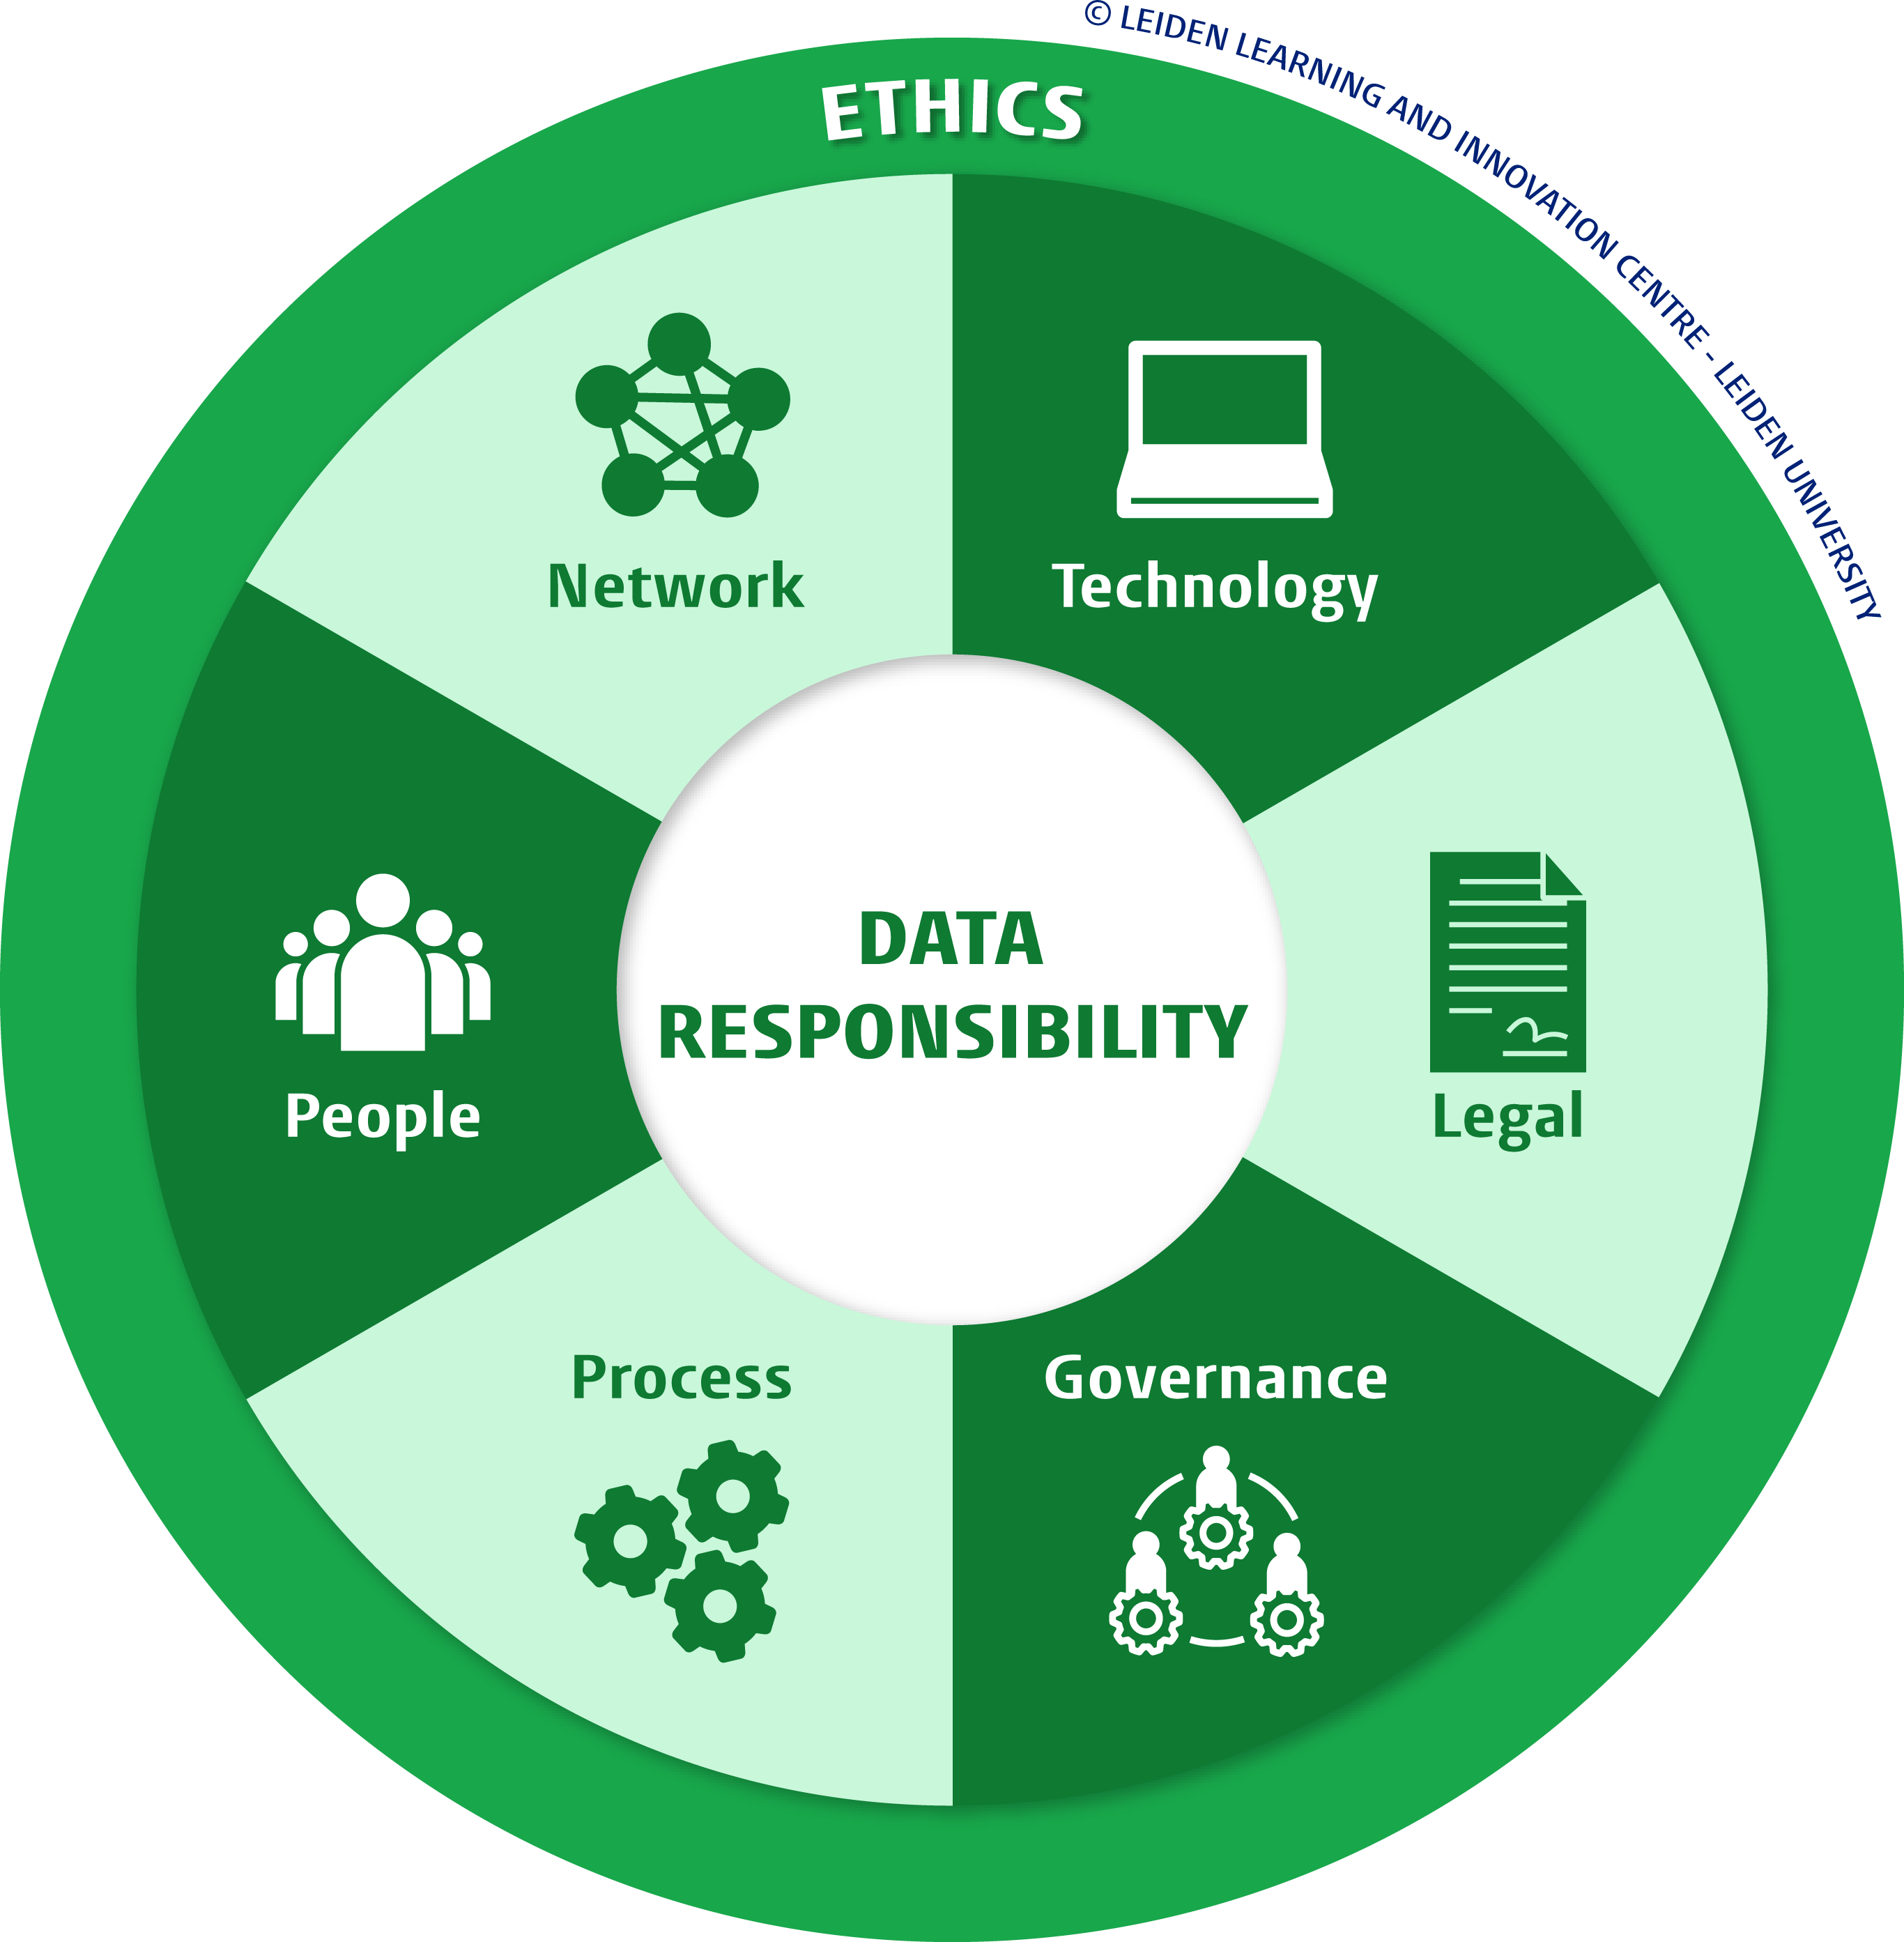 Holistic Data Responsibility Framework in Projects: Effective and Ethical Implementation